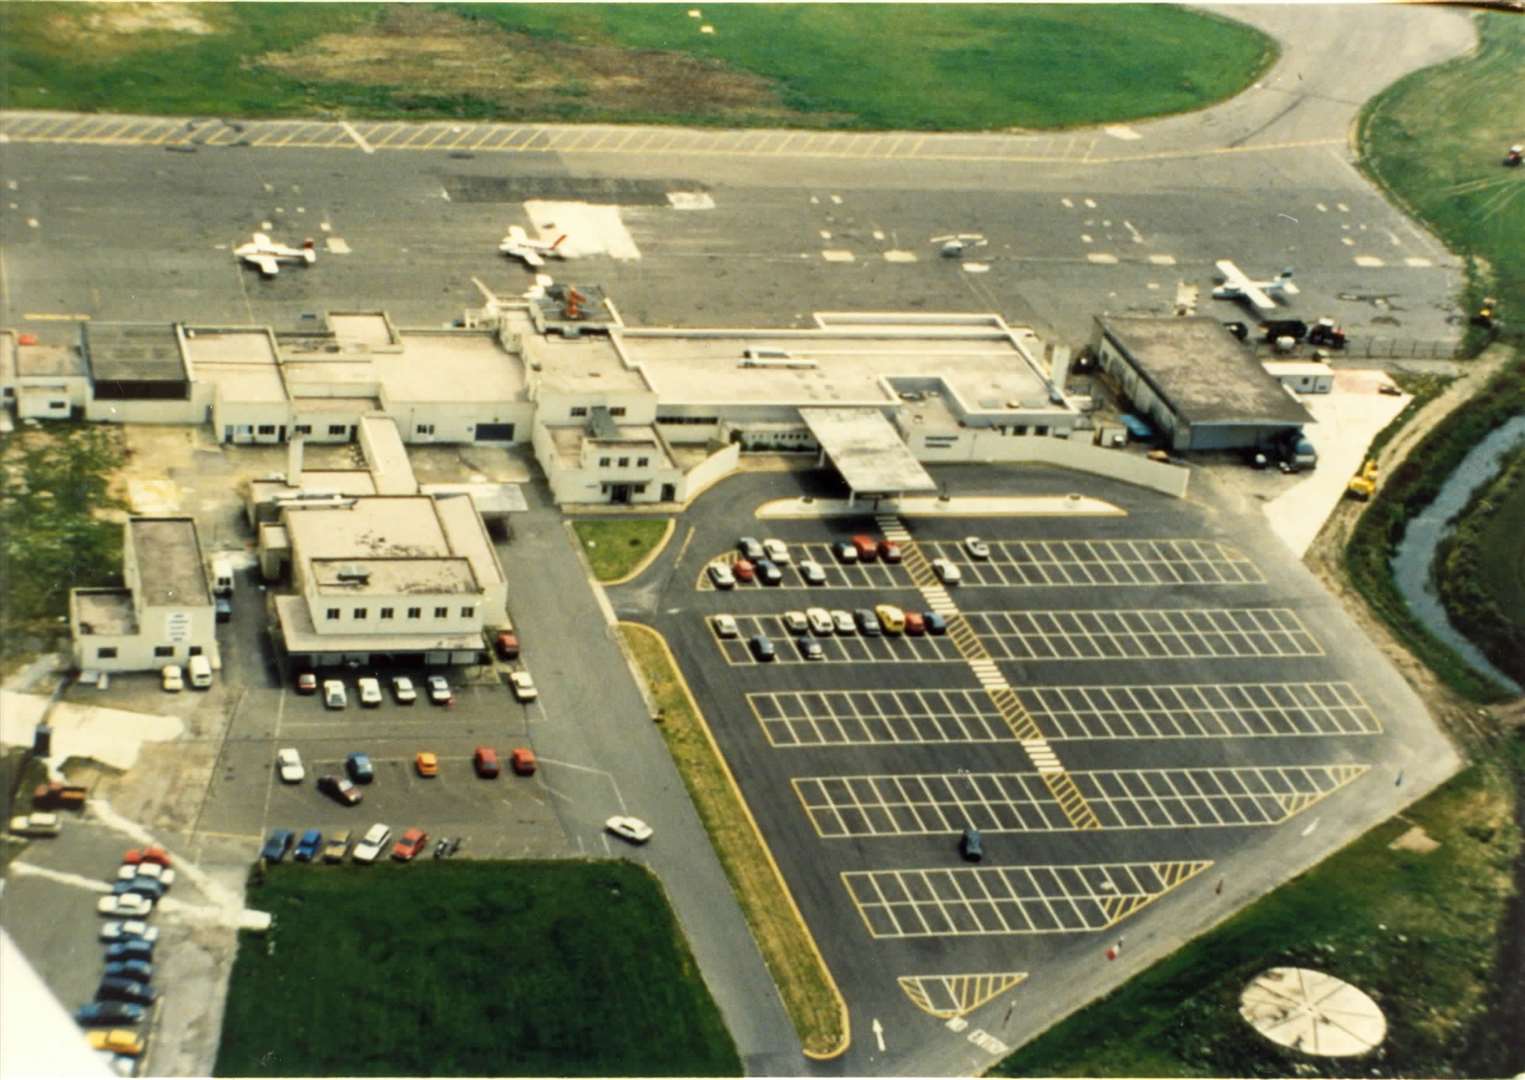 Lydd airport, 1991